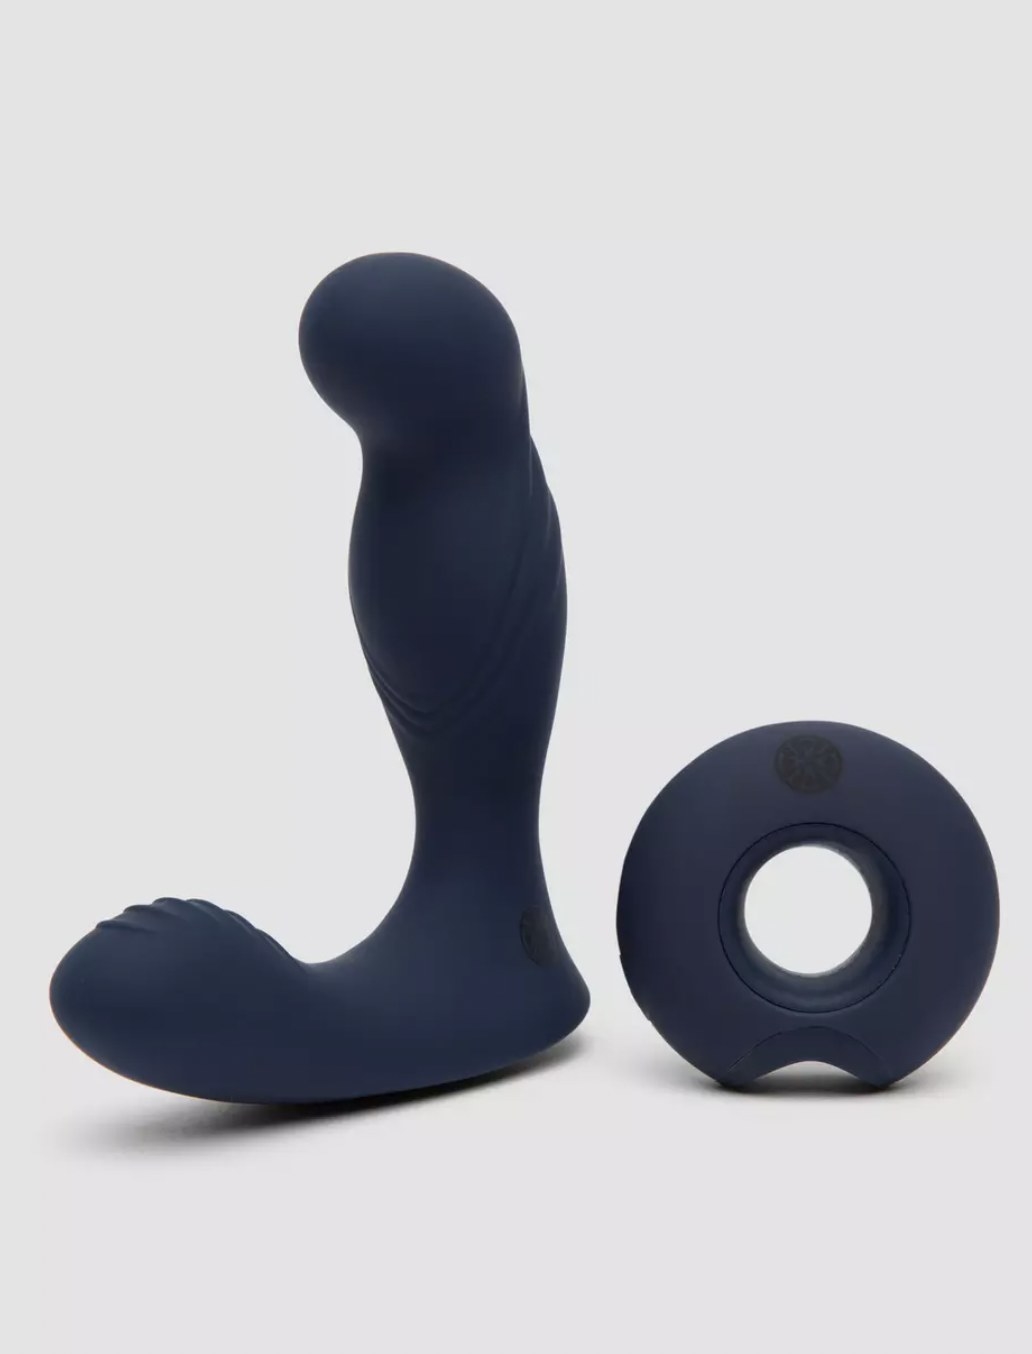 The blue prostate massager and remote